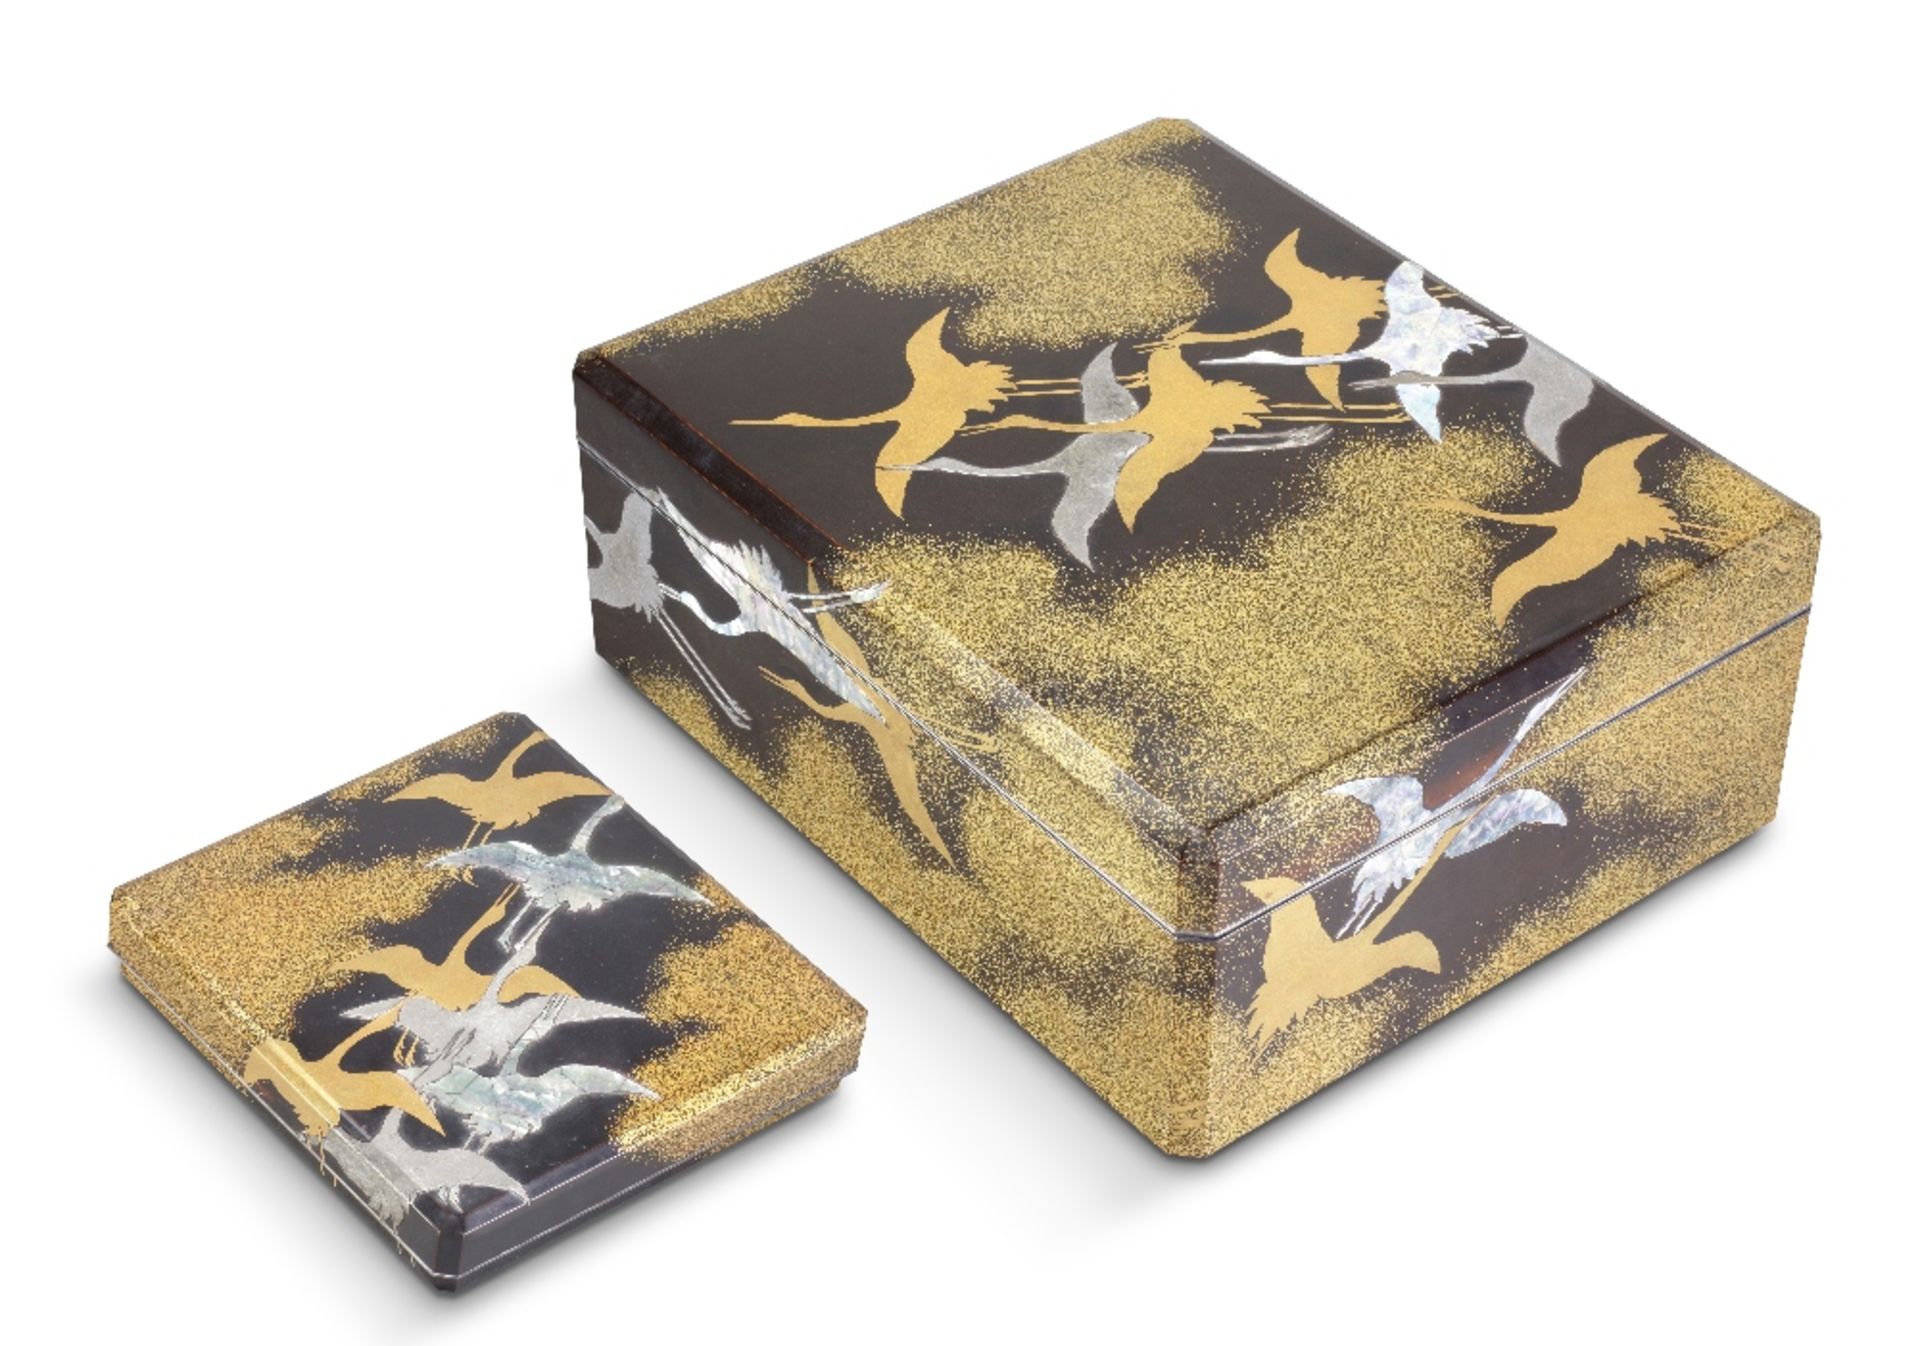 A GOLD AND BLACK-LACQUER MATCHING SET OF A RYOSHIBAKO (DOCUMENT BOX) AND SUZURIBAKO (BOX FOR WRI...